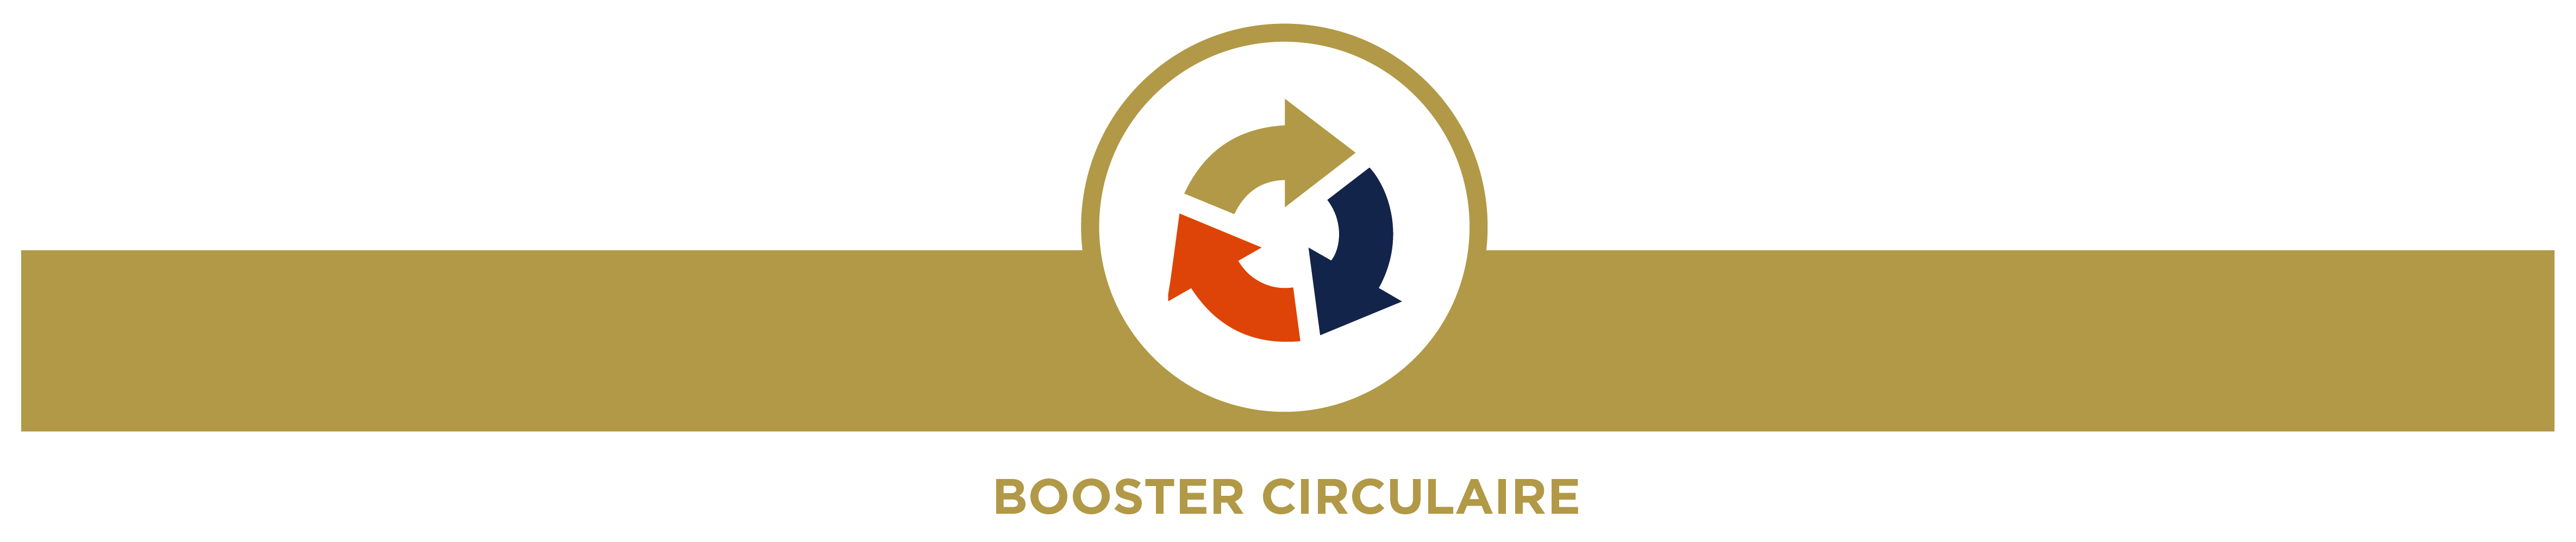 Booster Circulaire